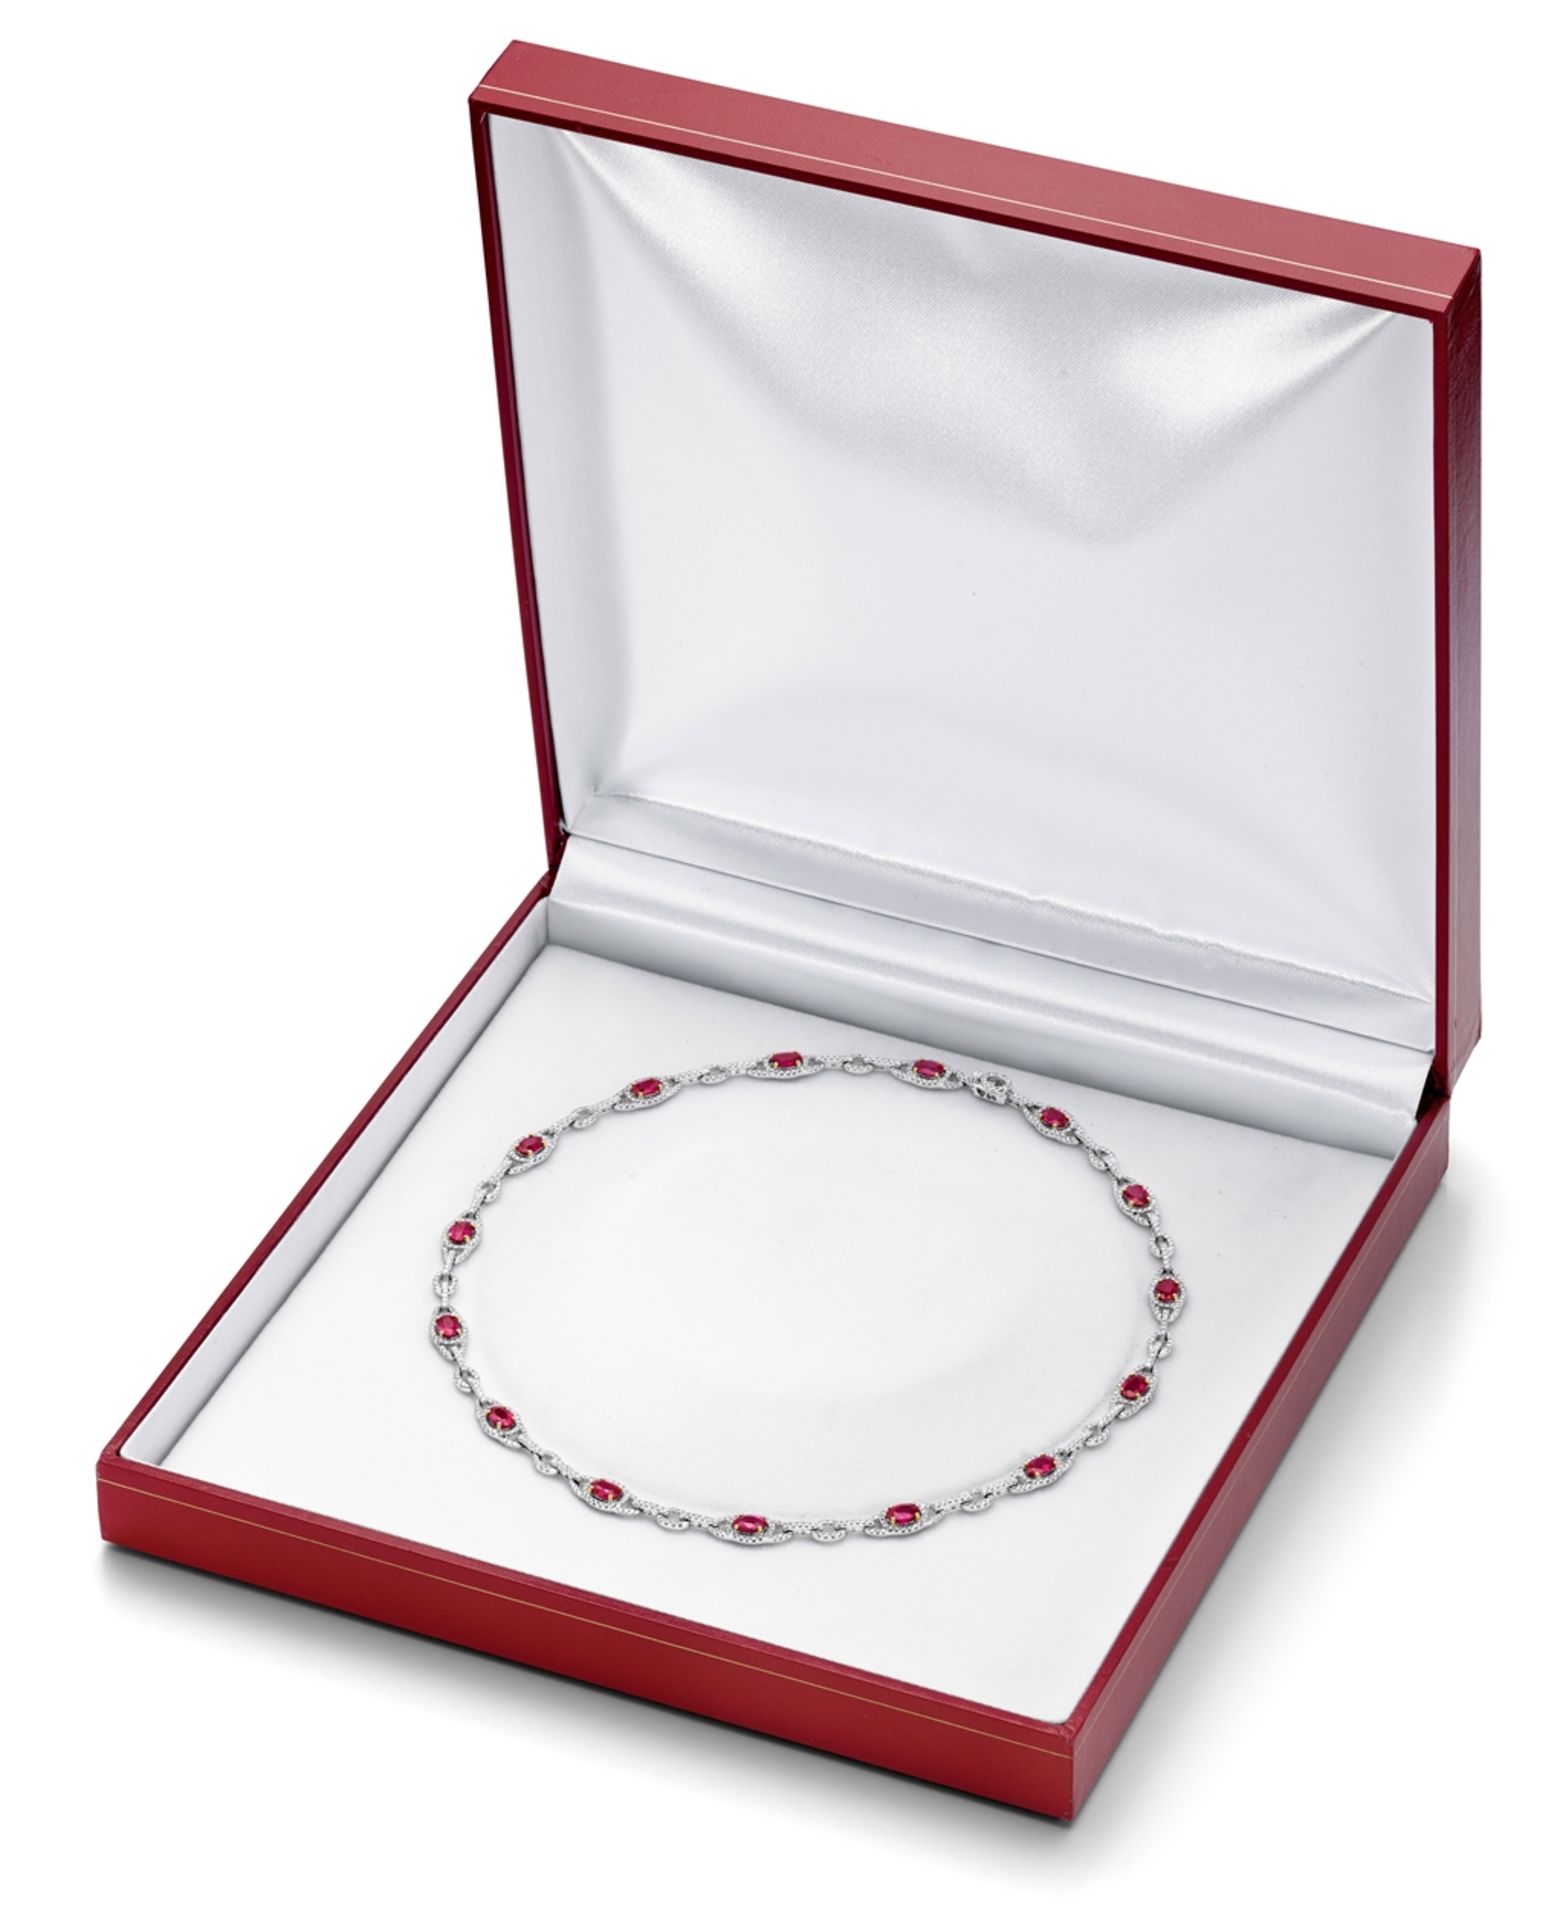 Ruby necklace with diamonds - Image 2 of 2